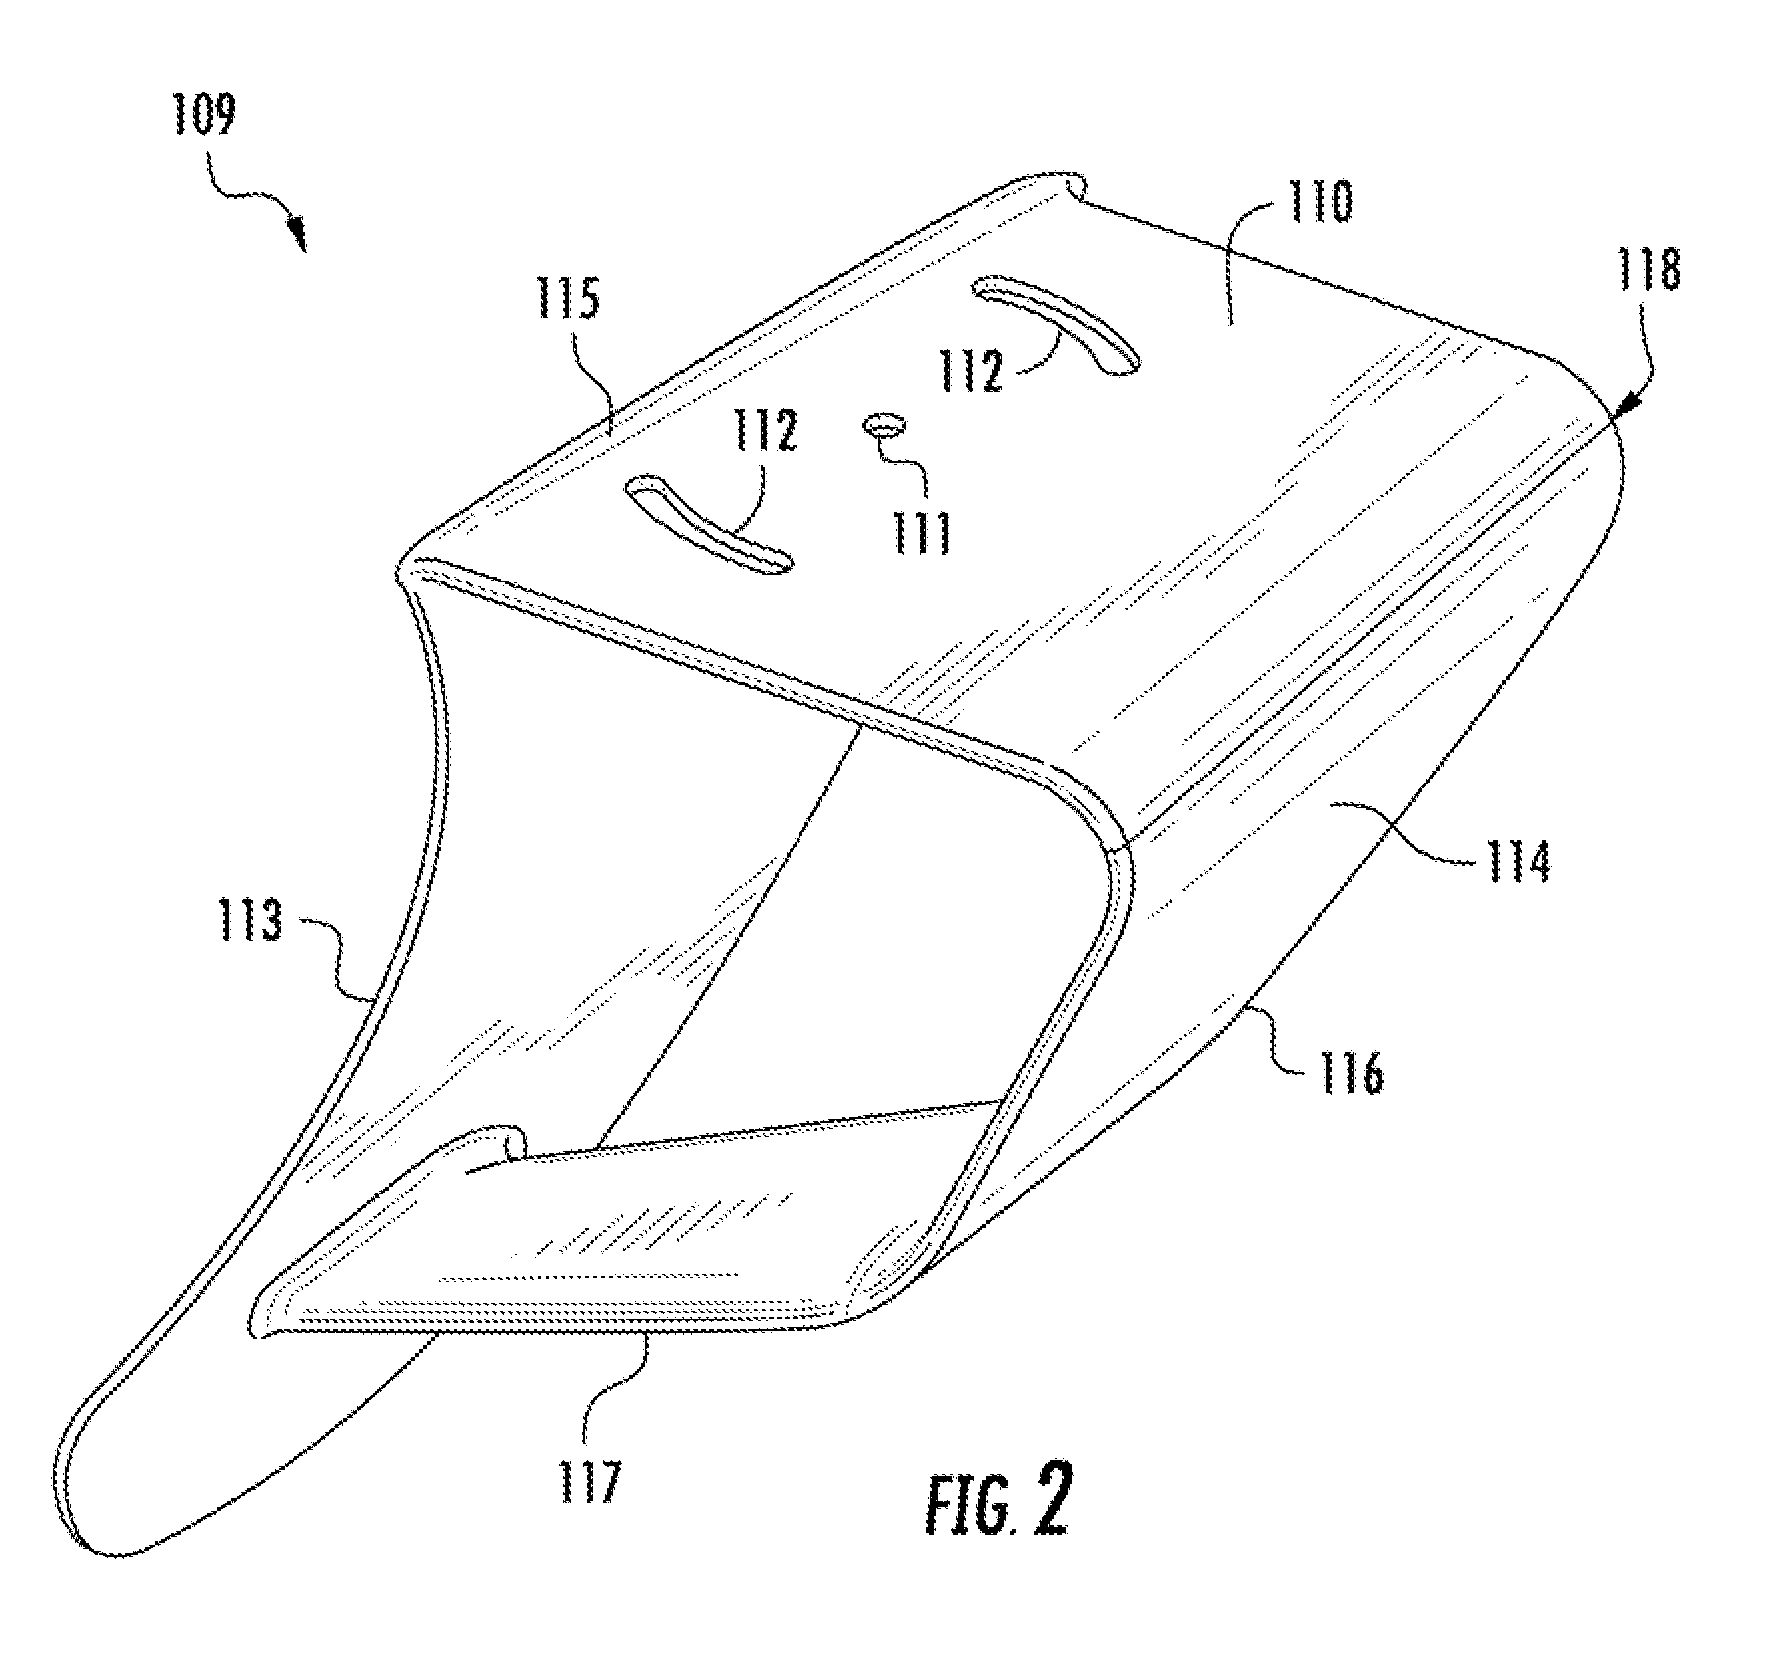 Surfboard fin for generating surfboard lift and method of use